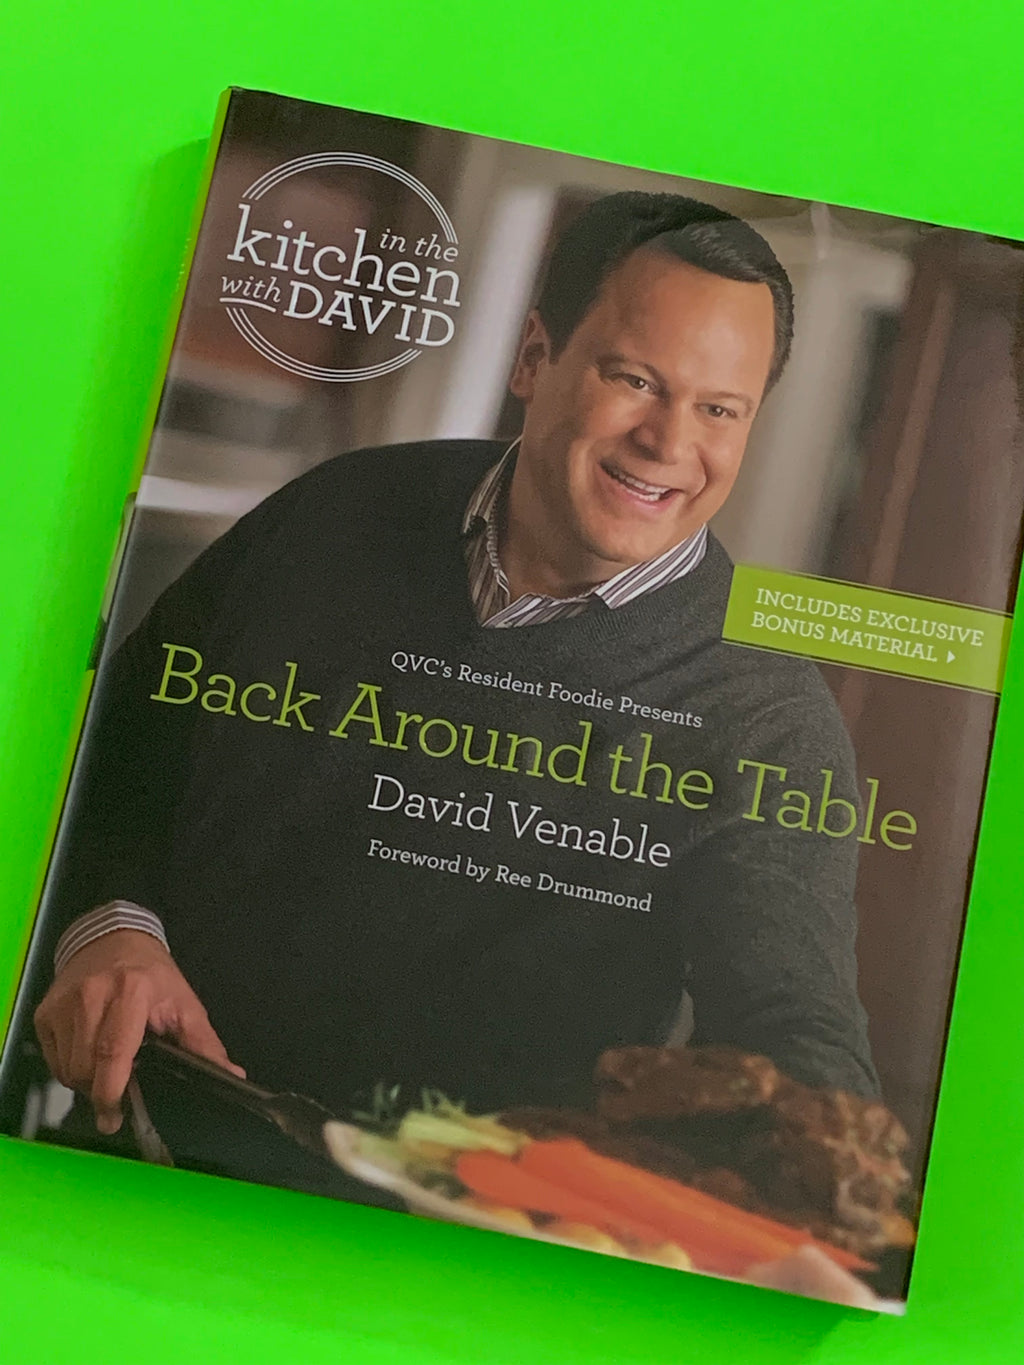 In the Kitchen with David: Back Around the Table- By David Venable